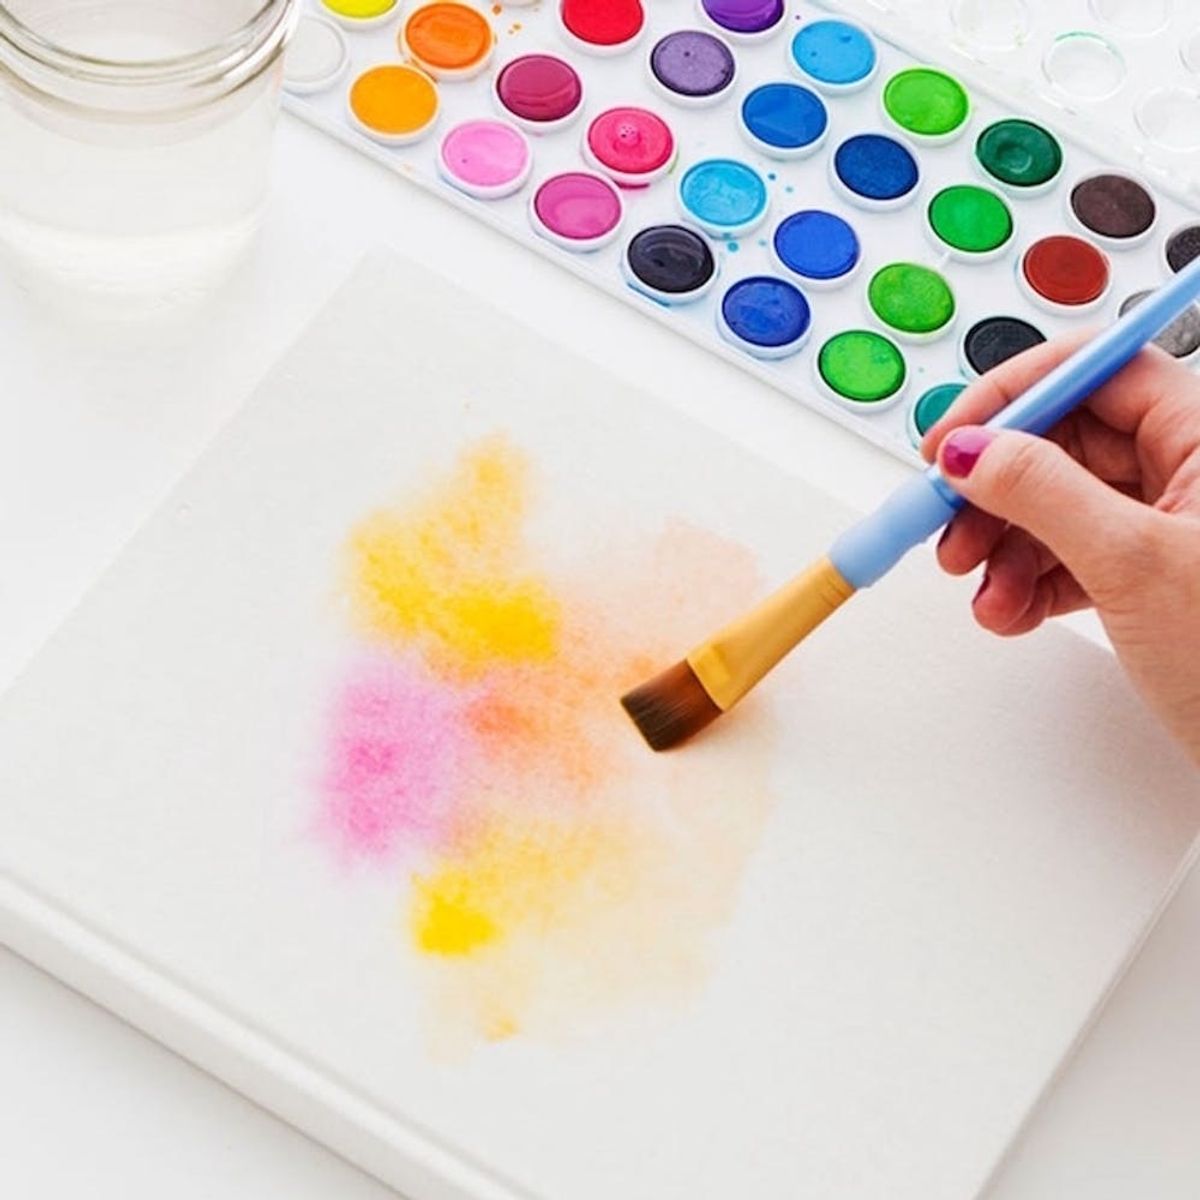 8 Ways to Be Super Creative With Paint This Weekend